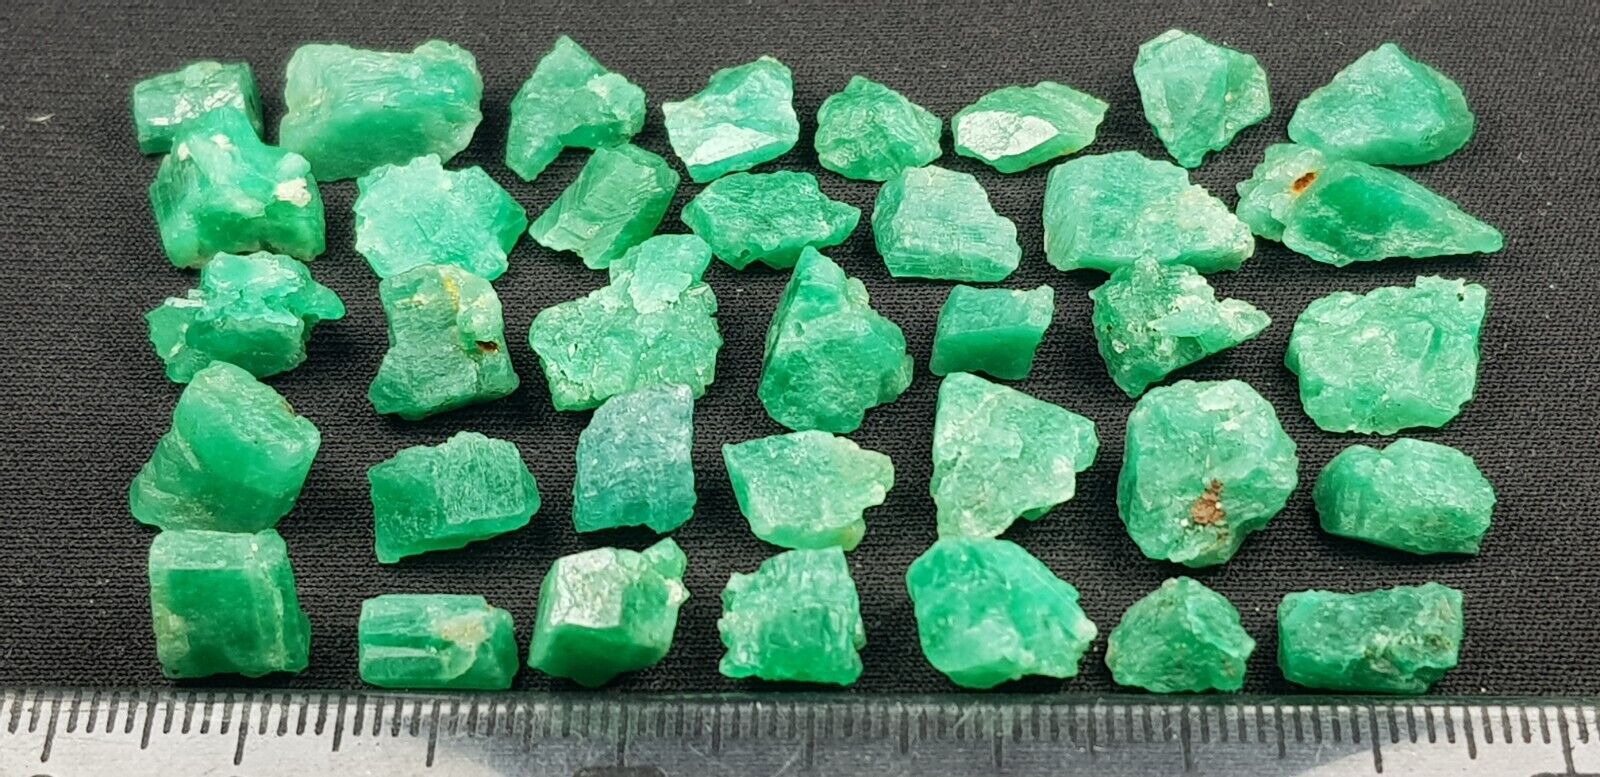 80 Ct Natural Green Color Emerald Crystal Lot From Pakistan